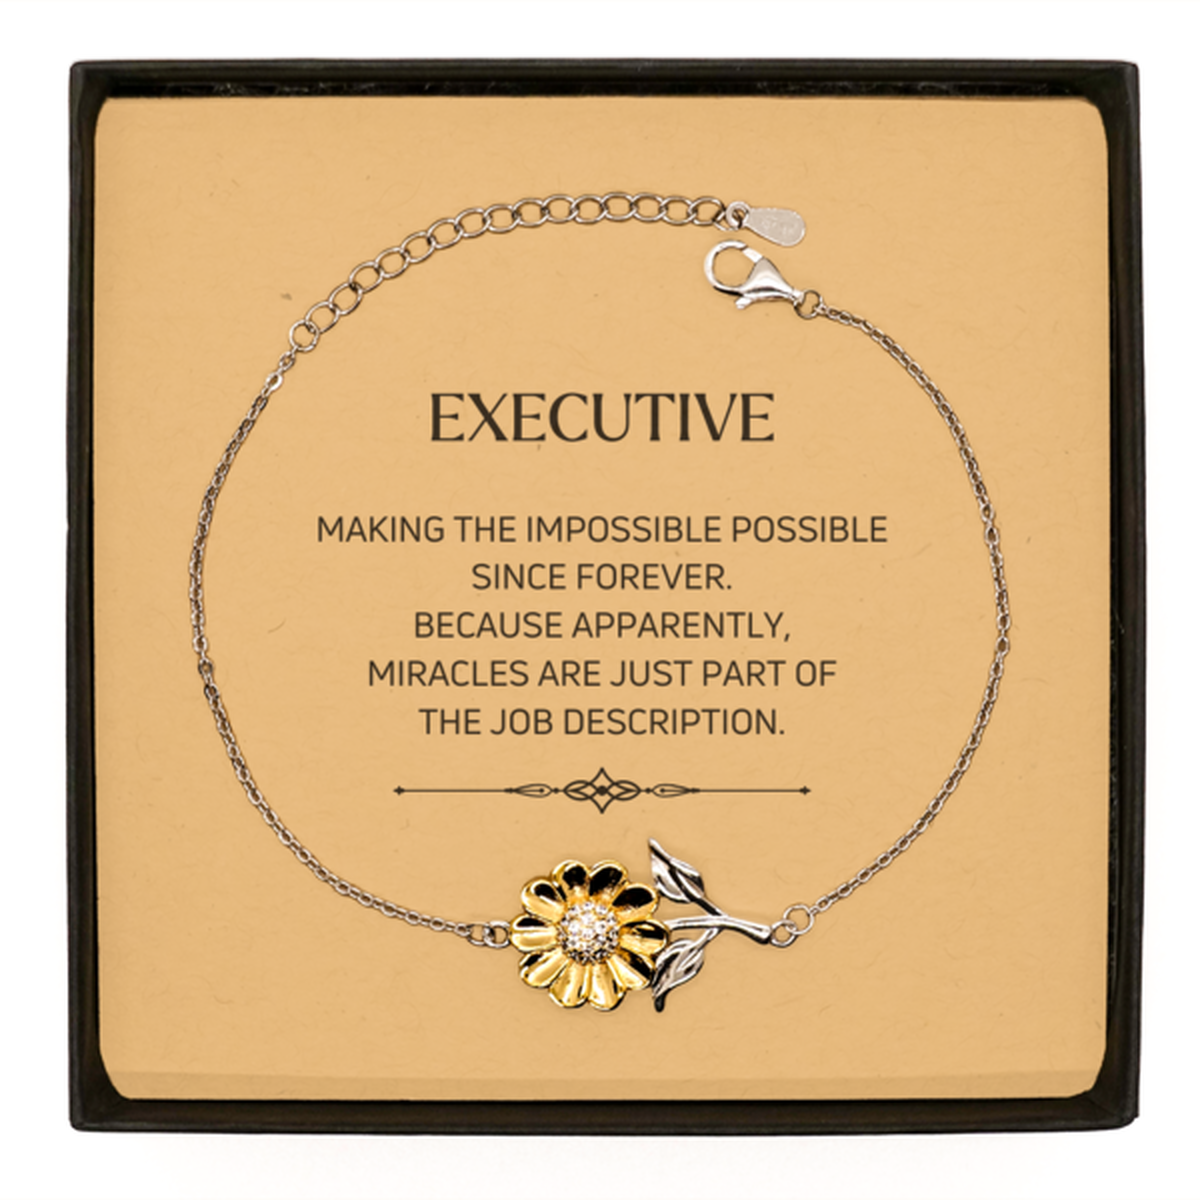 Funny Executive Gifts, Miracles are just part of the job description, Inspirational Birthday Sunflower Bracelet For Executive, Men, Women, Coworkers, Friends, Boss